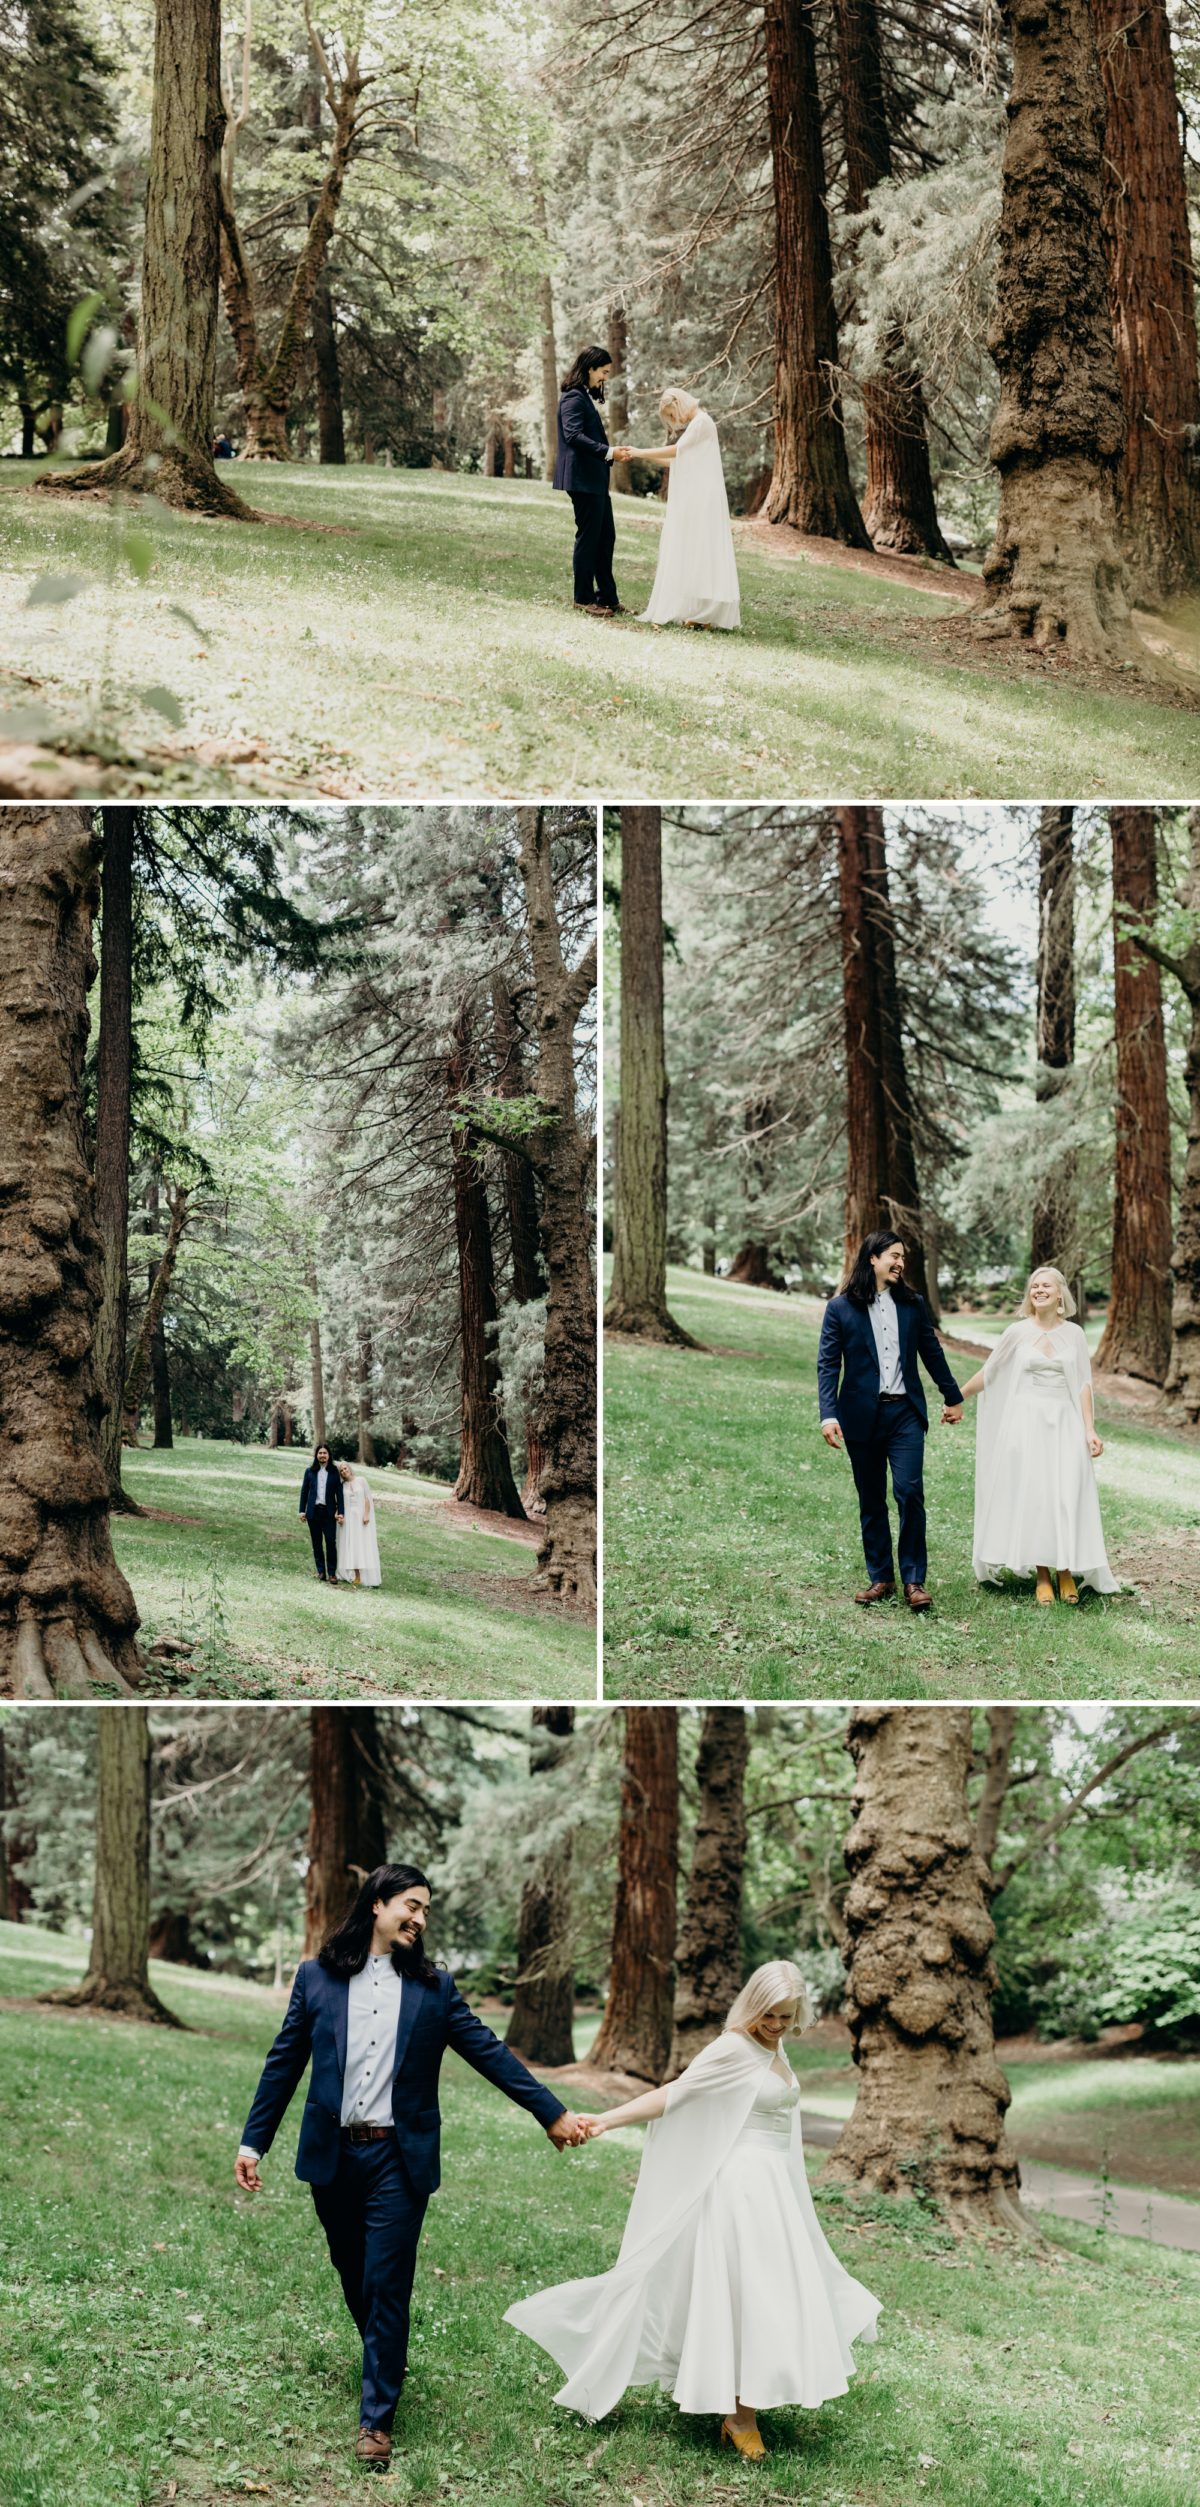 First look and couple's portraits in Laurelhurst Park in Portland, OR. Coopers Hall Wedding photographed by Briana Morrison Photography